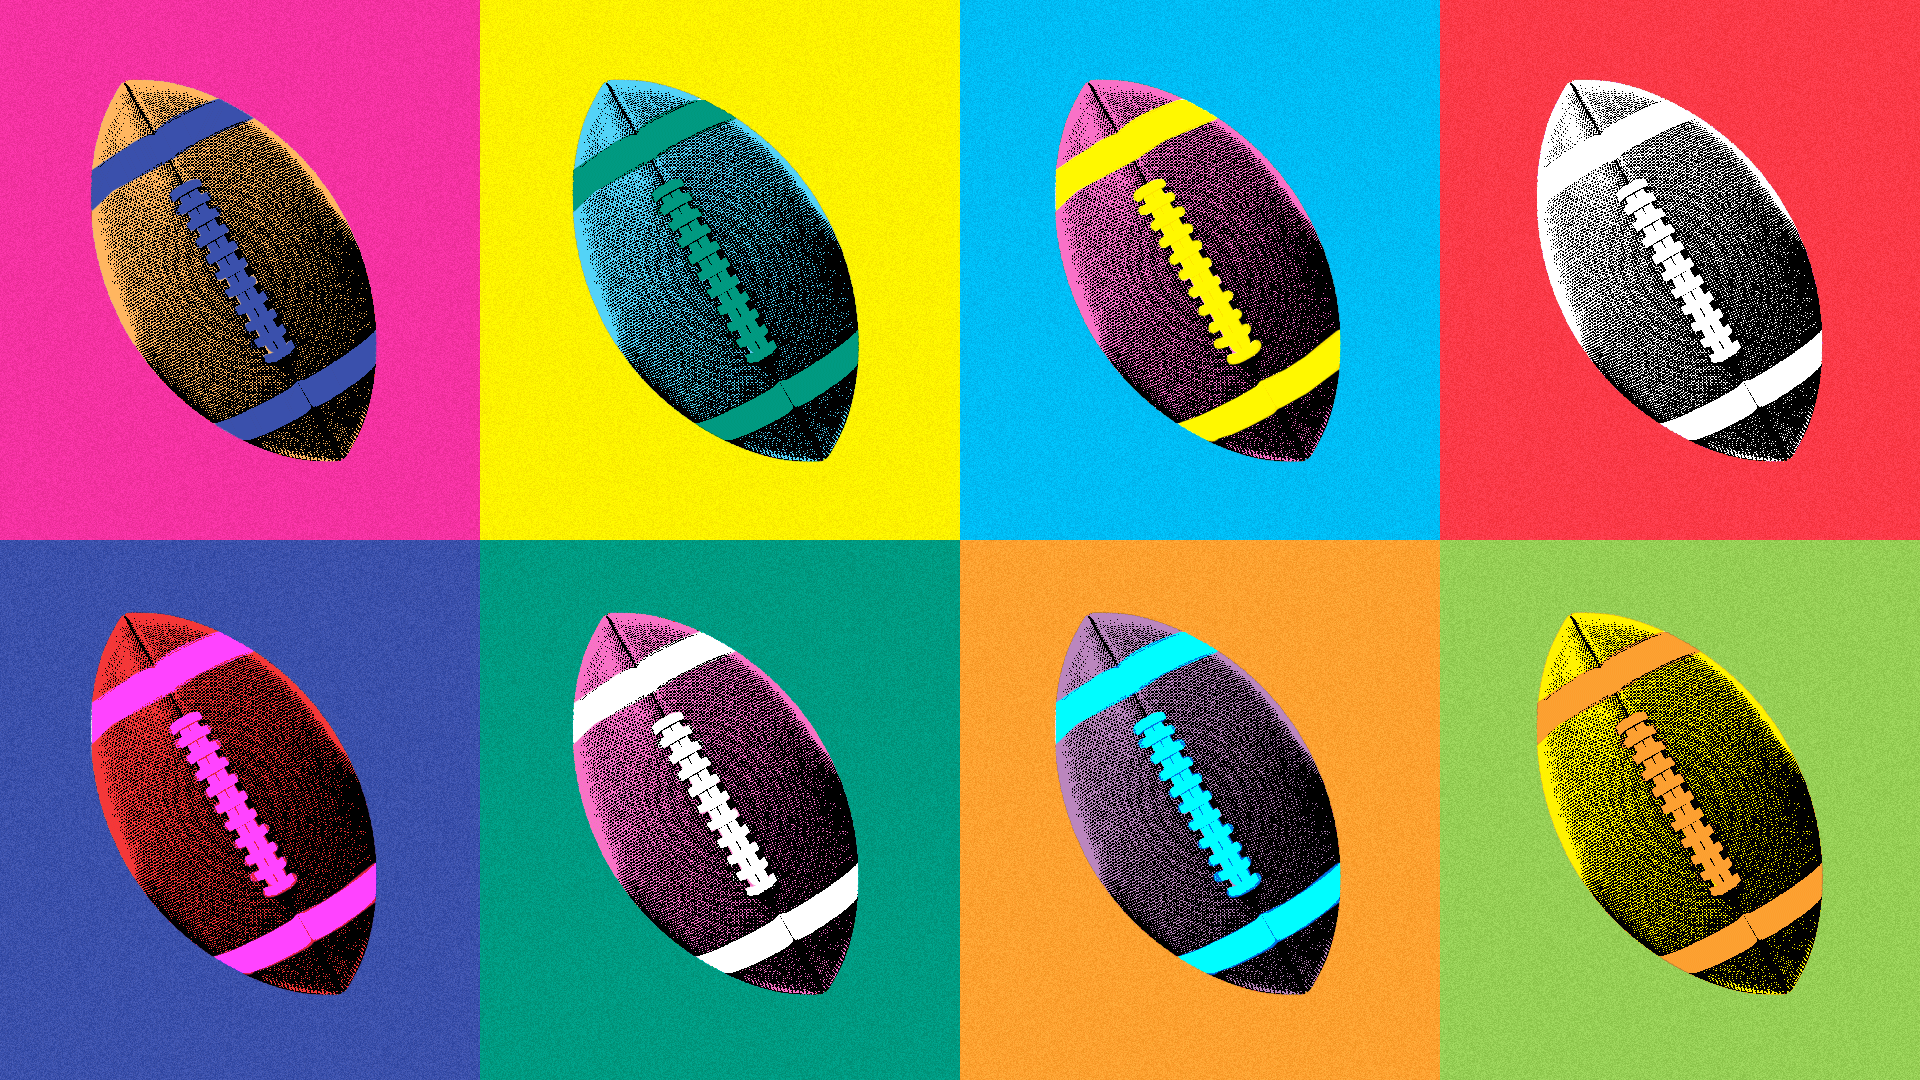 Illustration of different colored footballs